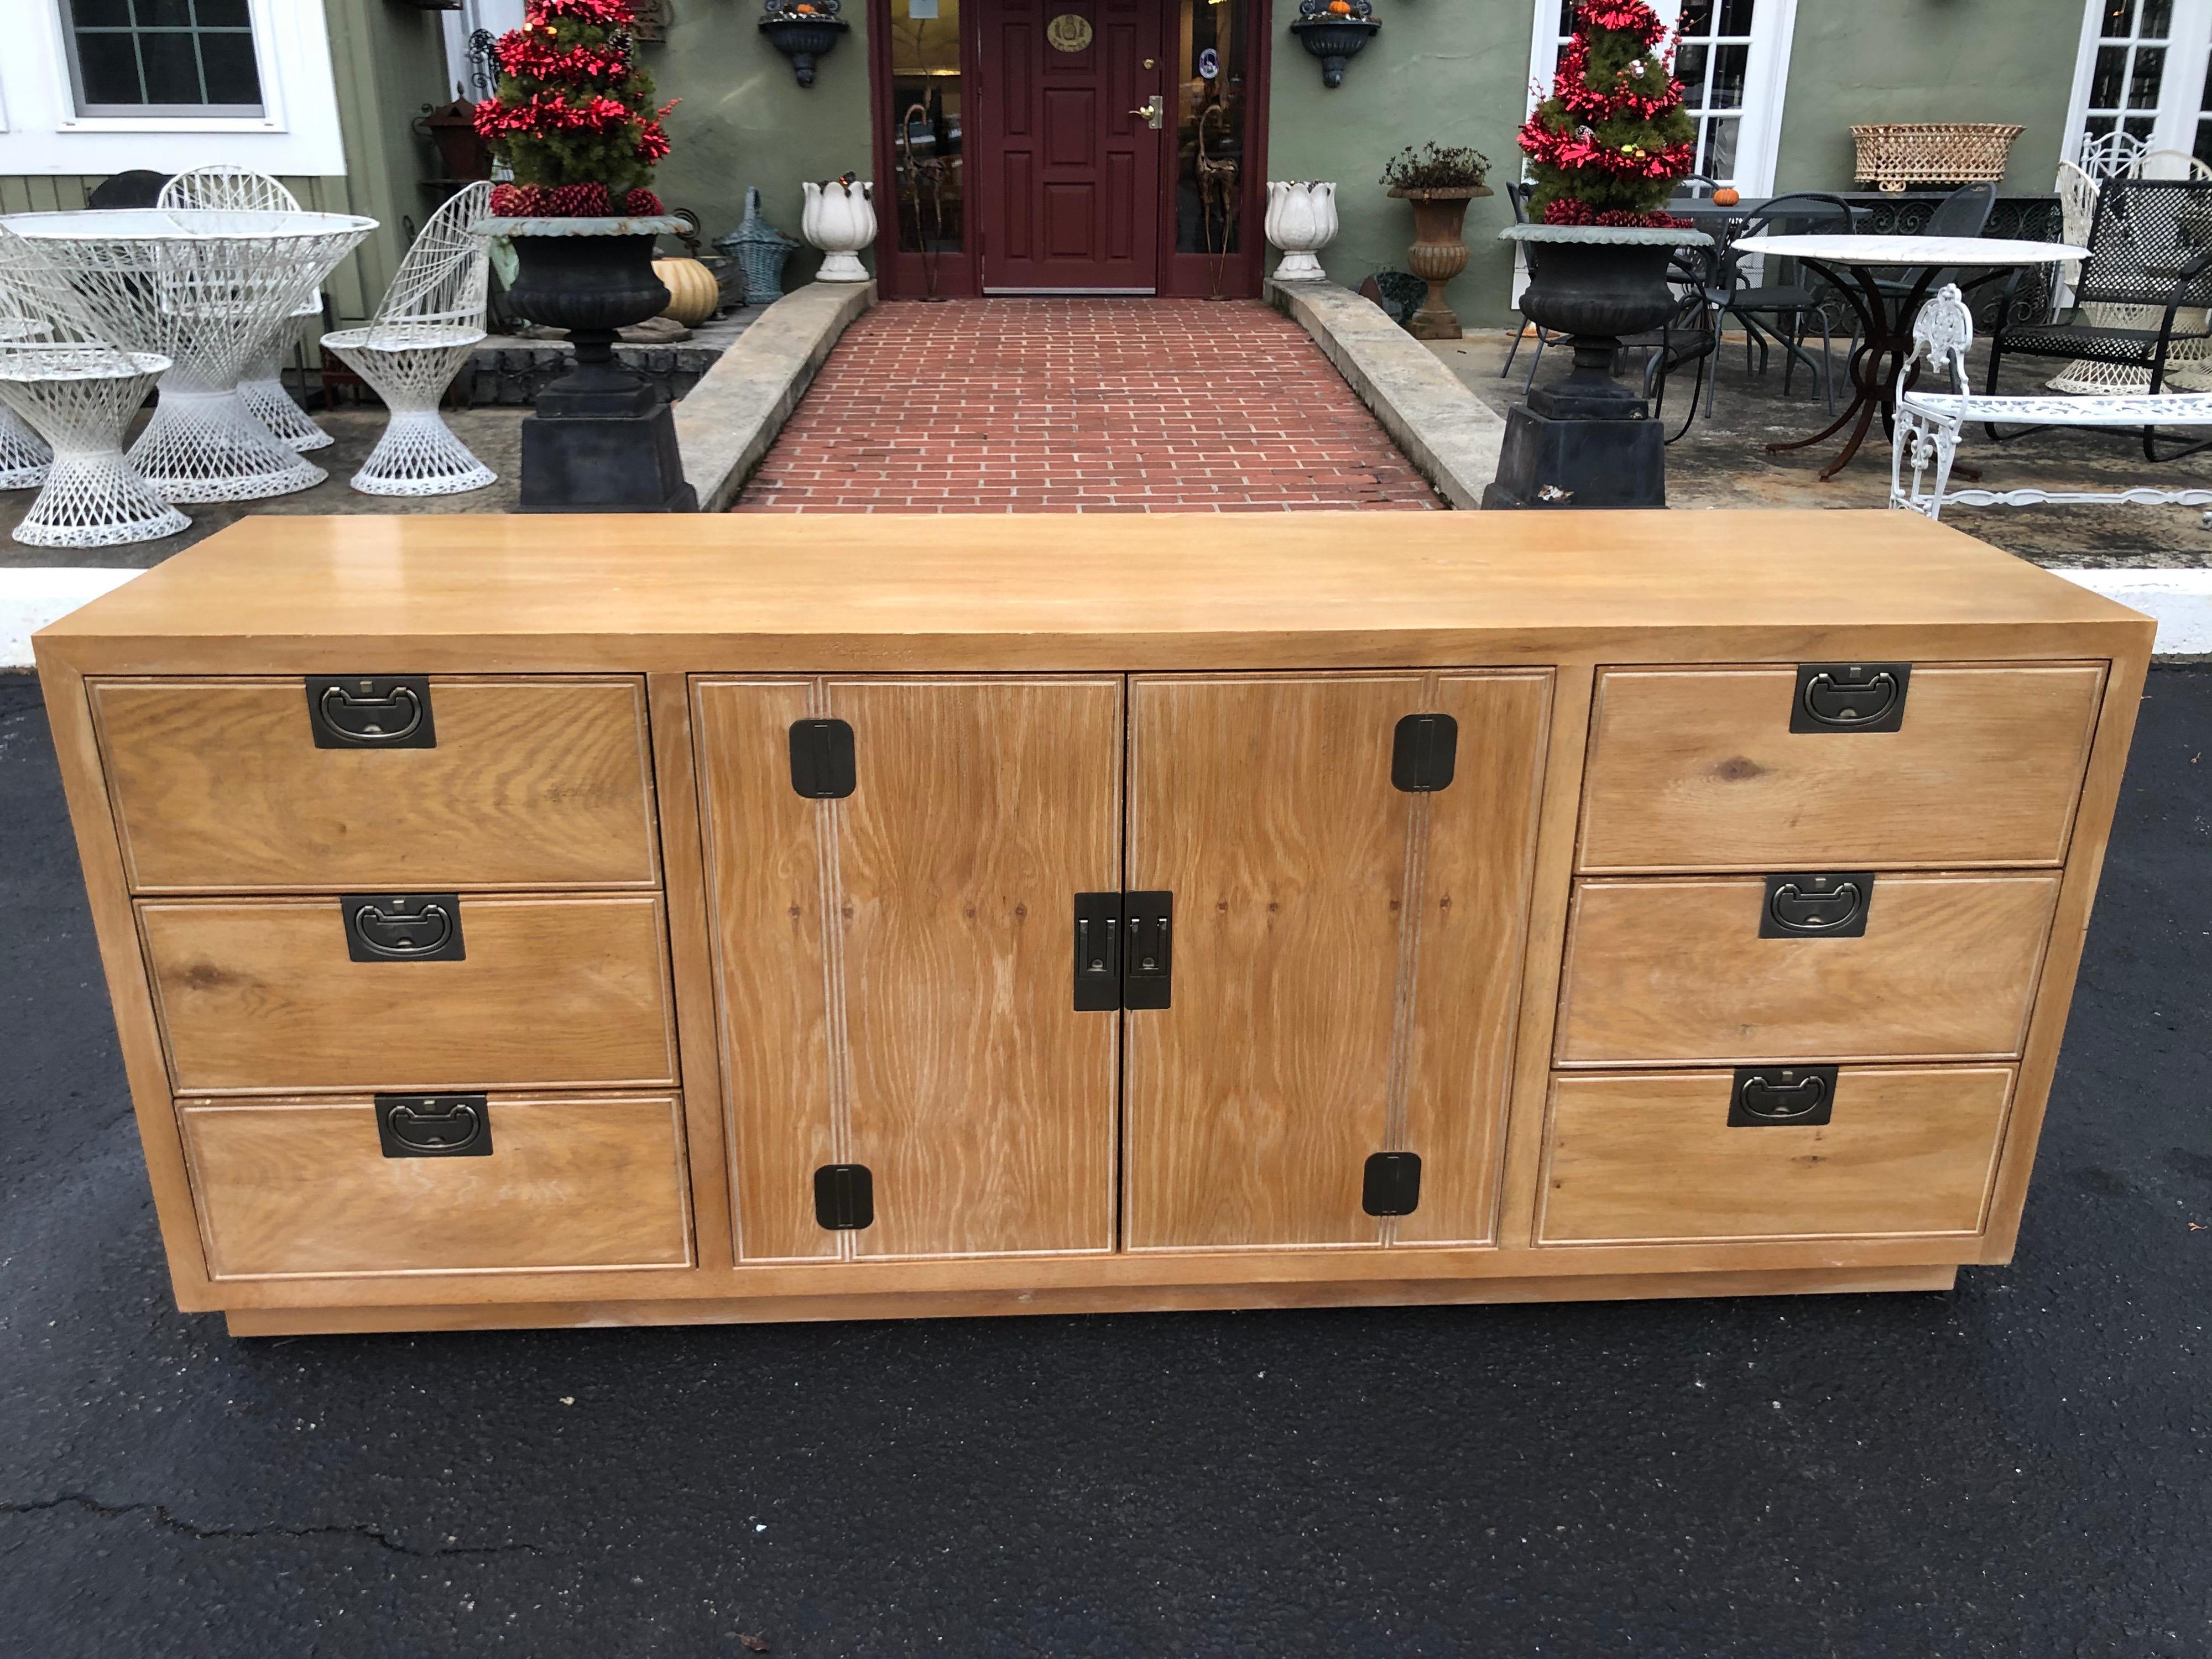 Vintage cherused campaign style oak dresser or credenza. Solid construction with original recessed metal campaign hardware. Three drawers one either side. Center doors open to a middle cabinet. If wanted we can have a custom shelf made as the